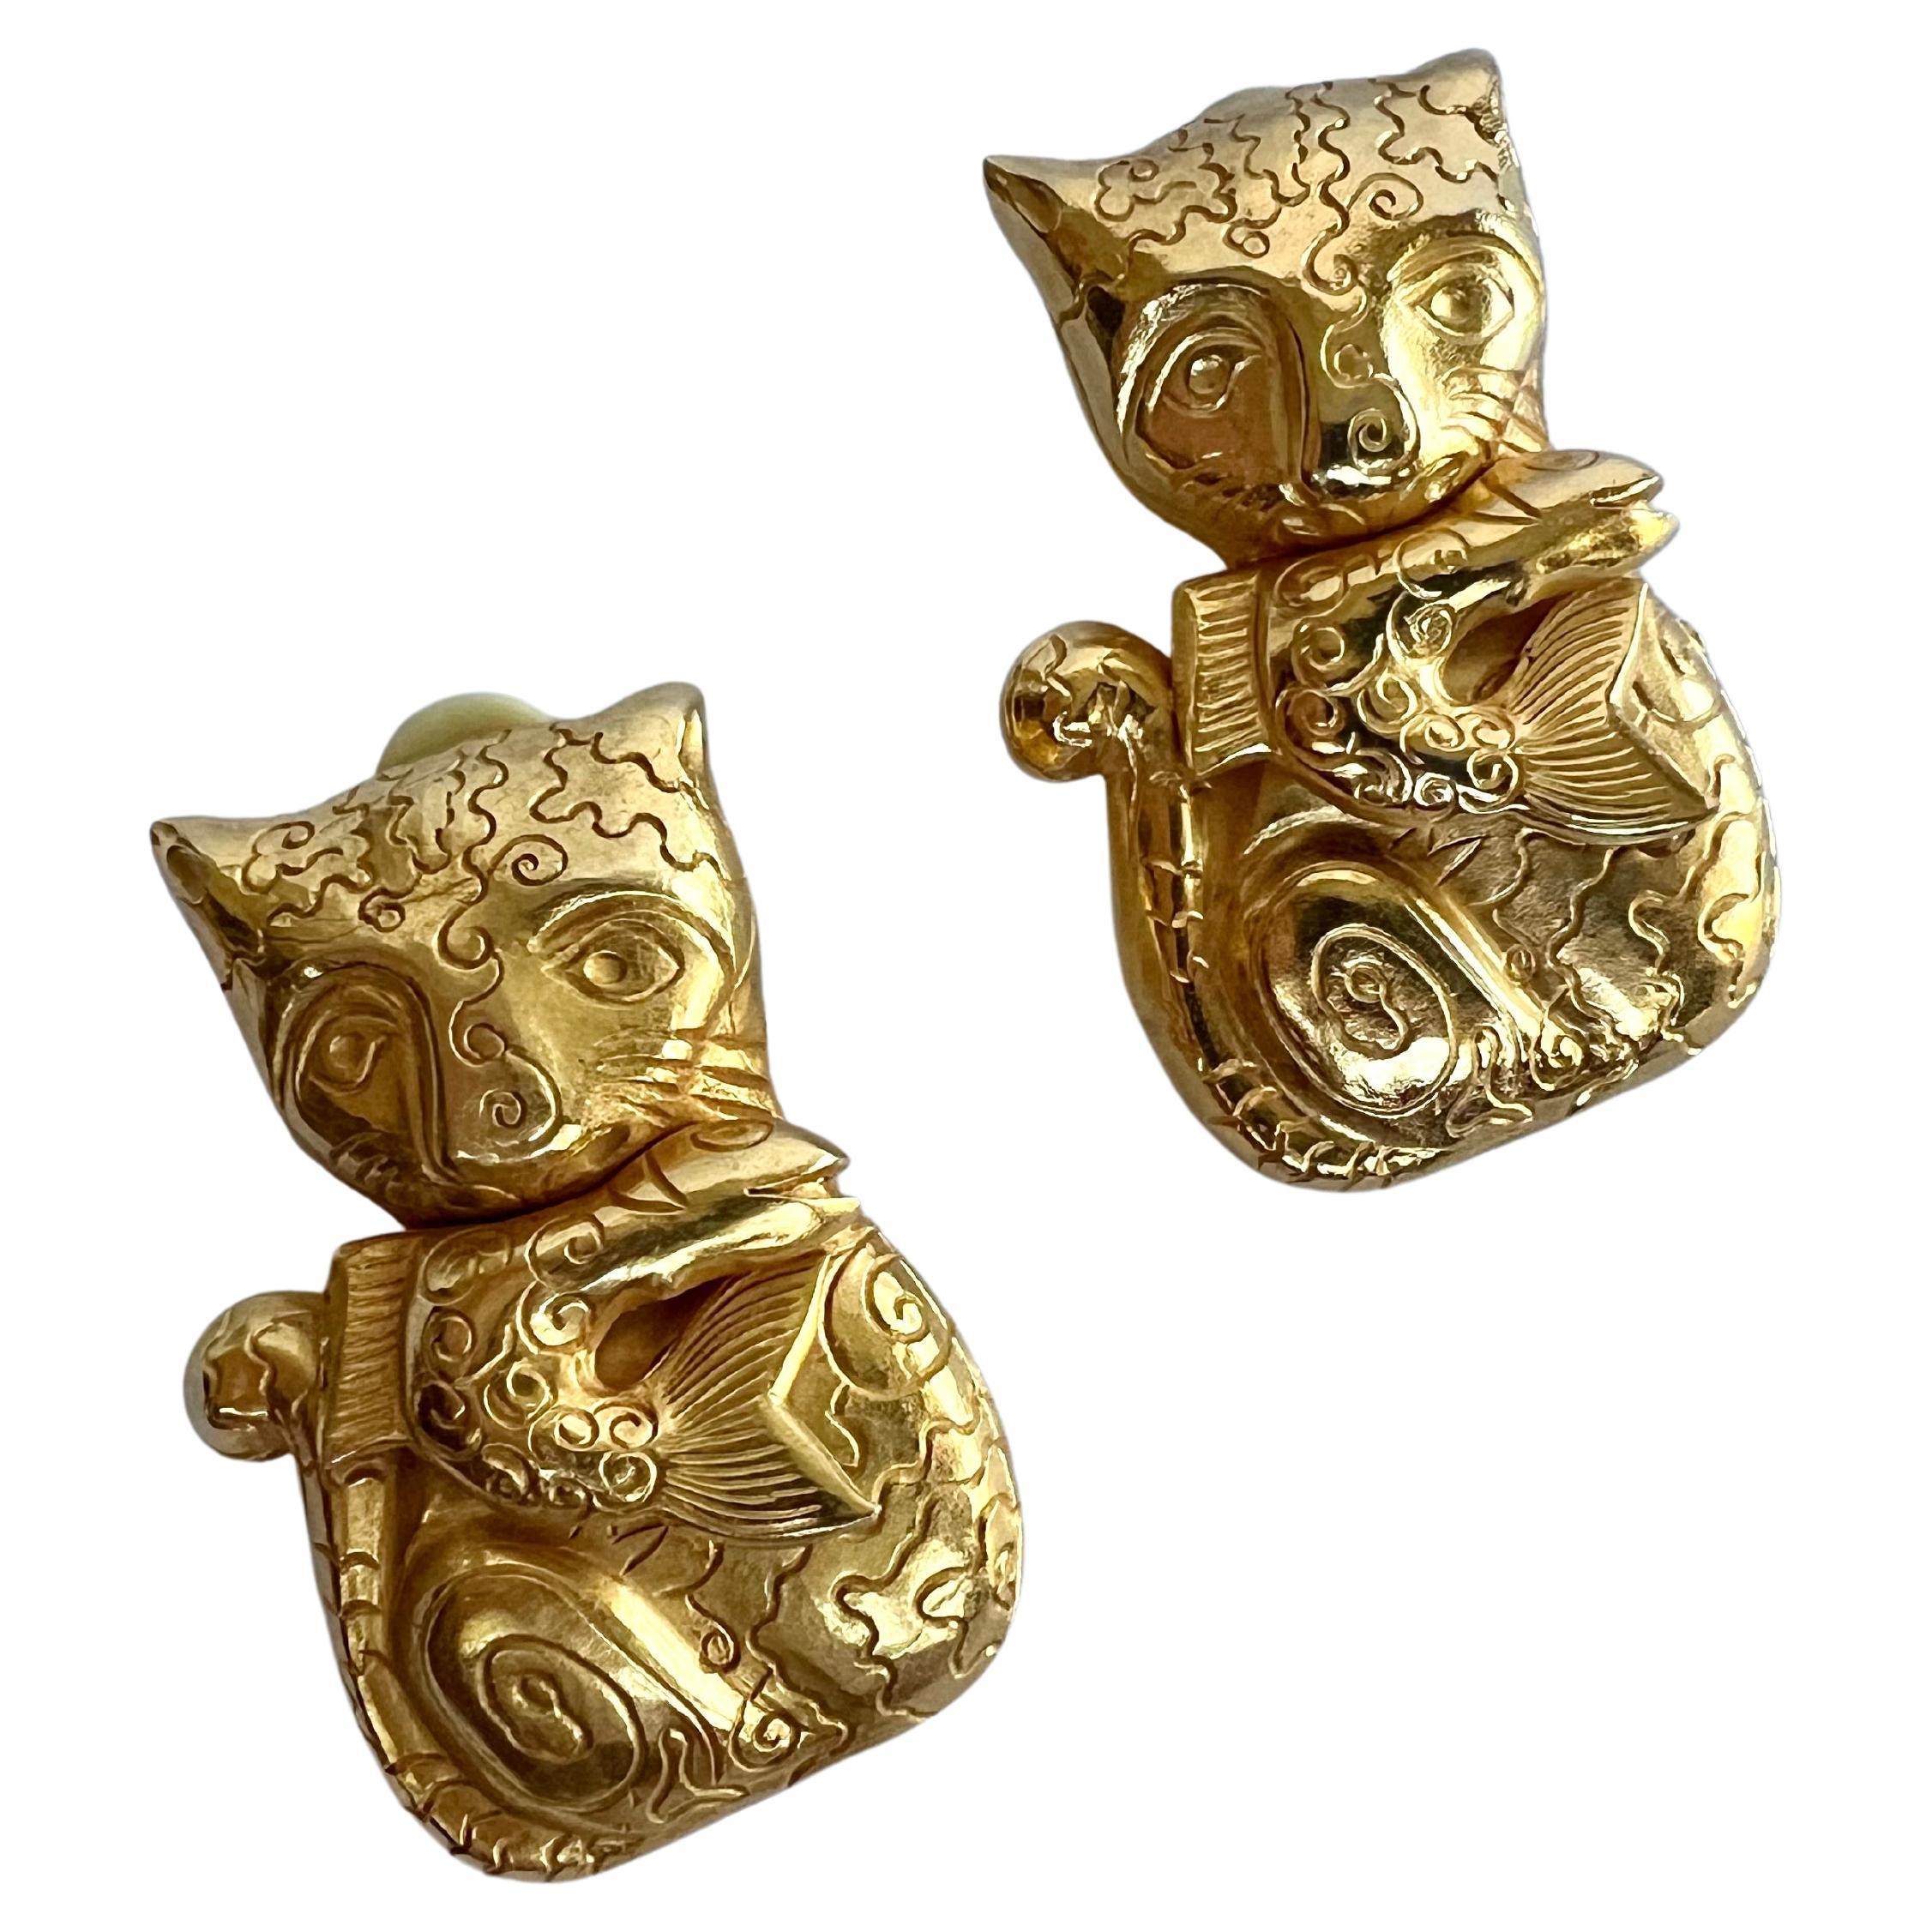 Vintage XL Gilt Stylized Cat and Fish Earrings by Isabel Canovas 